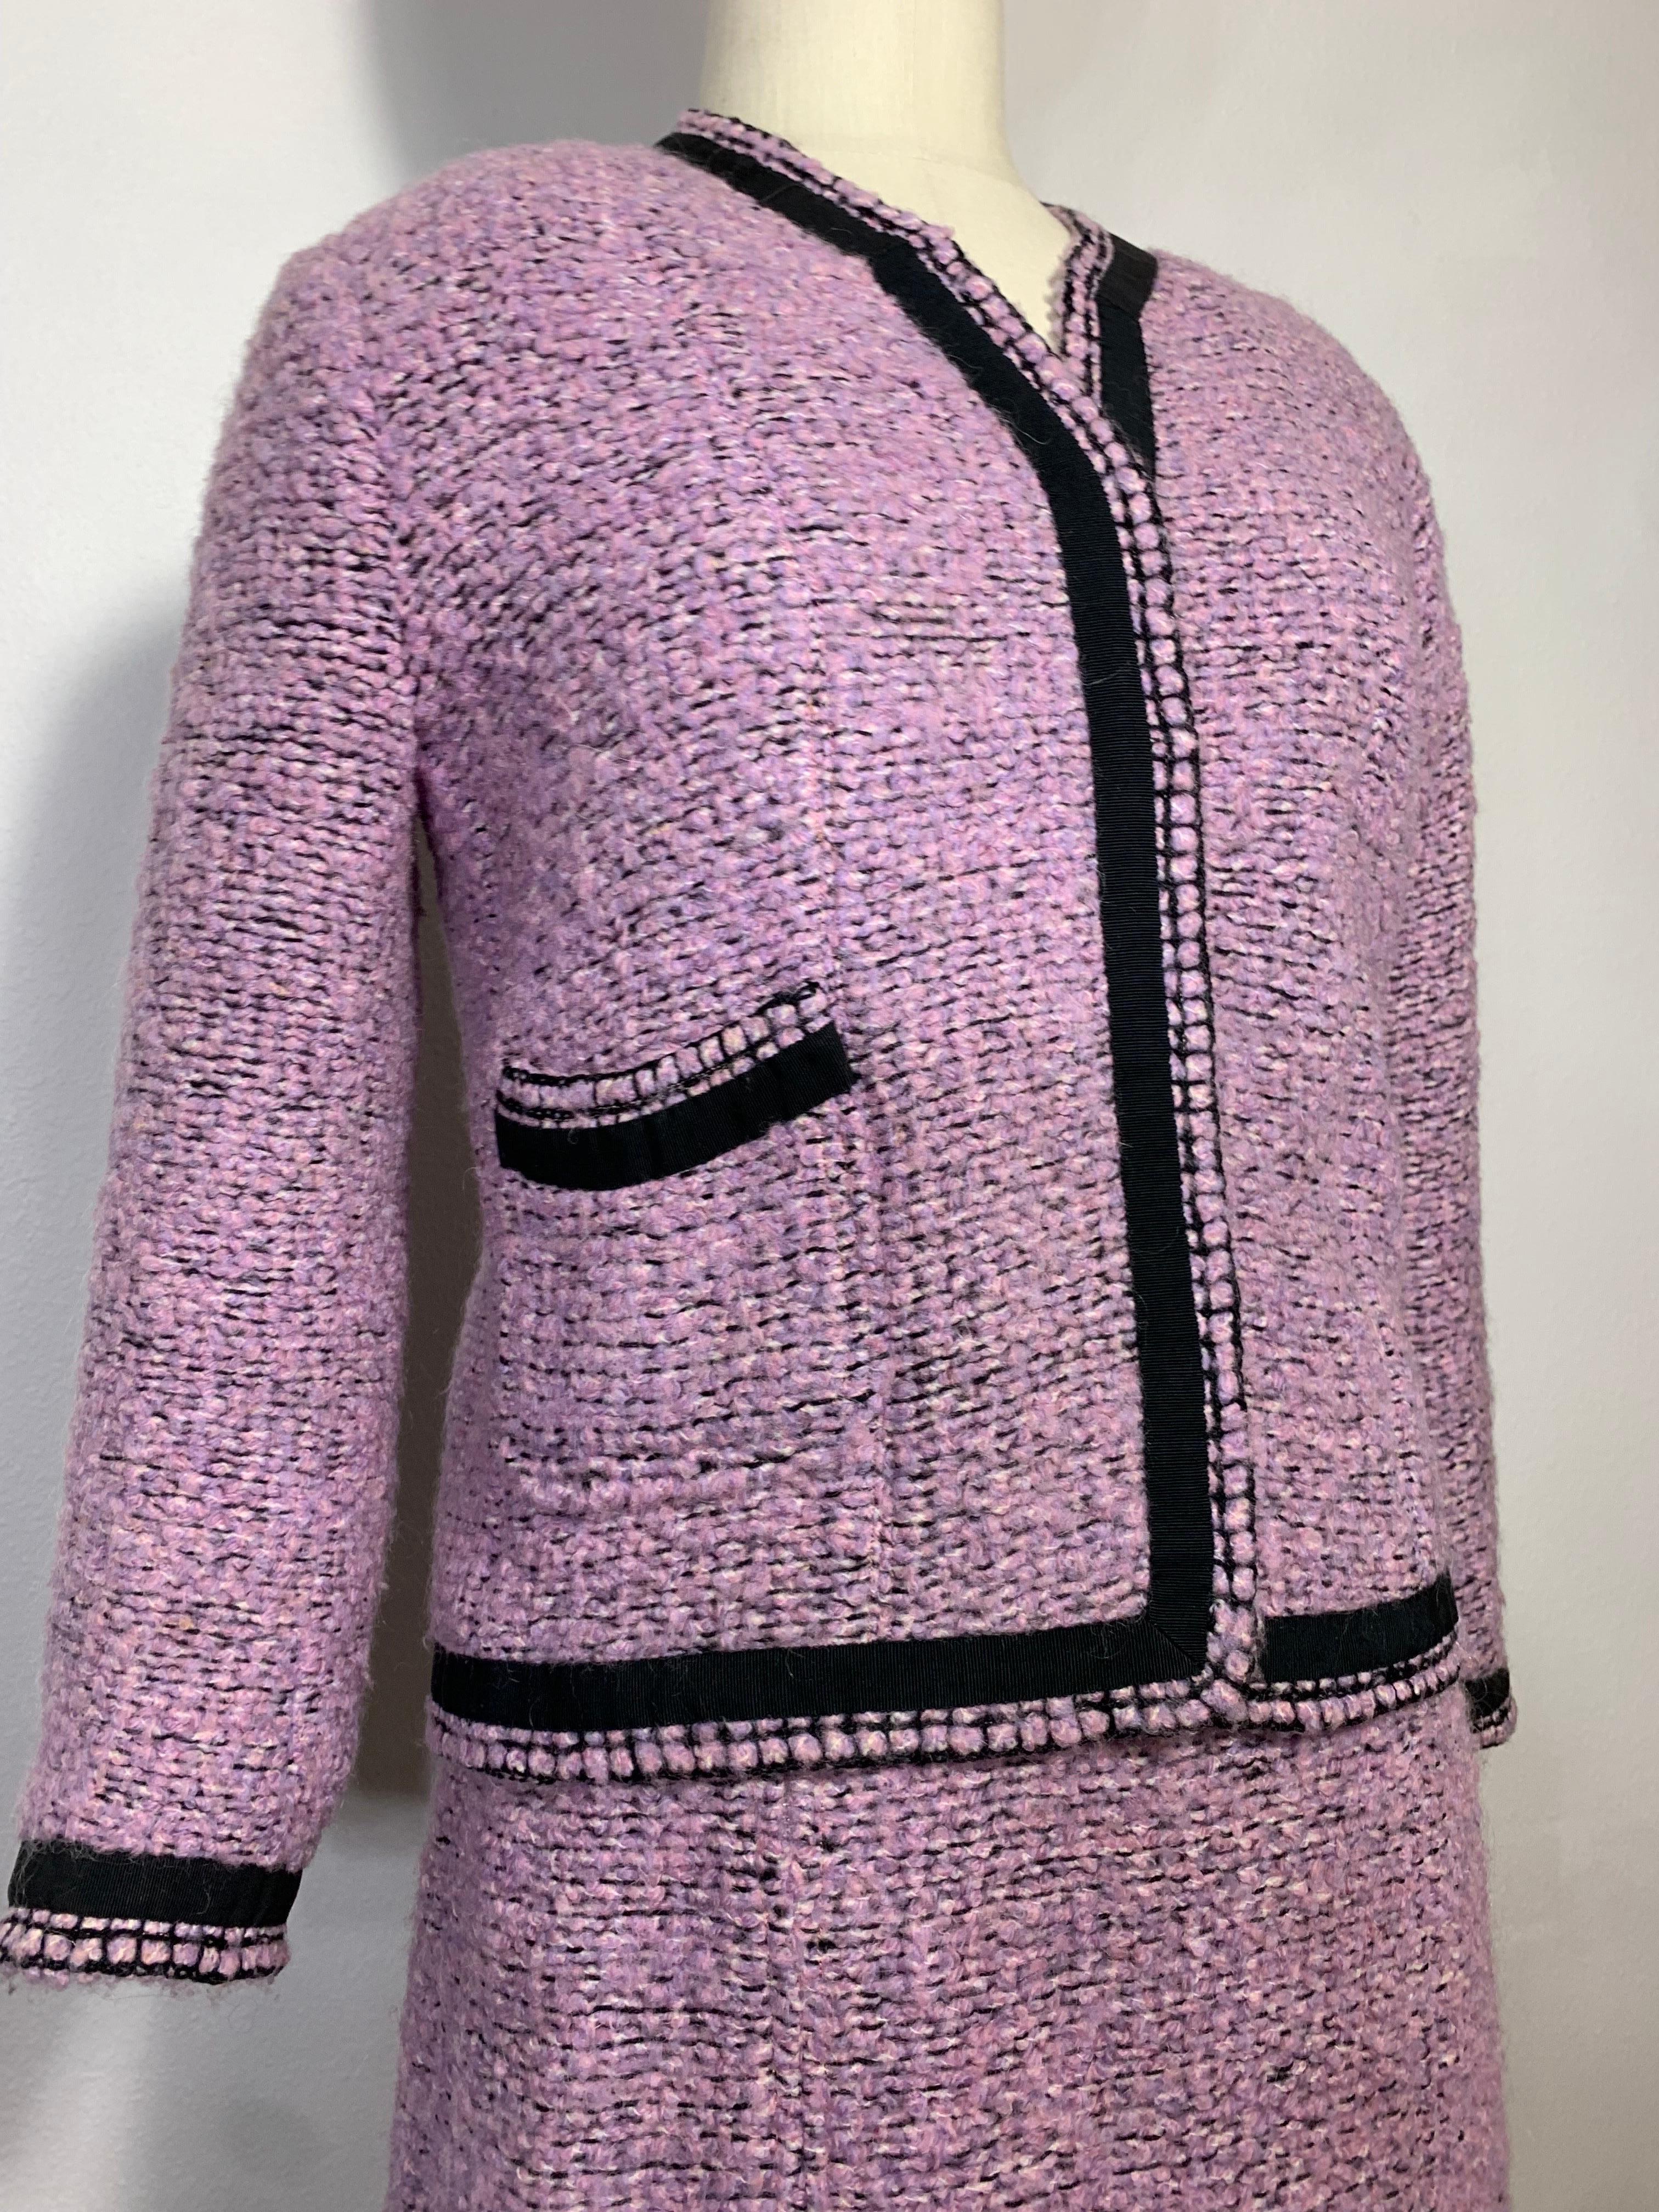 Women's 1960 Autumn/Winter Chanel Haute Couture Documented Lavender Tweed Skirt Suit  For Sale